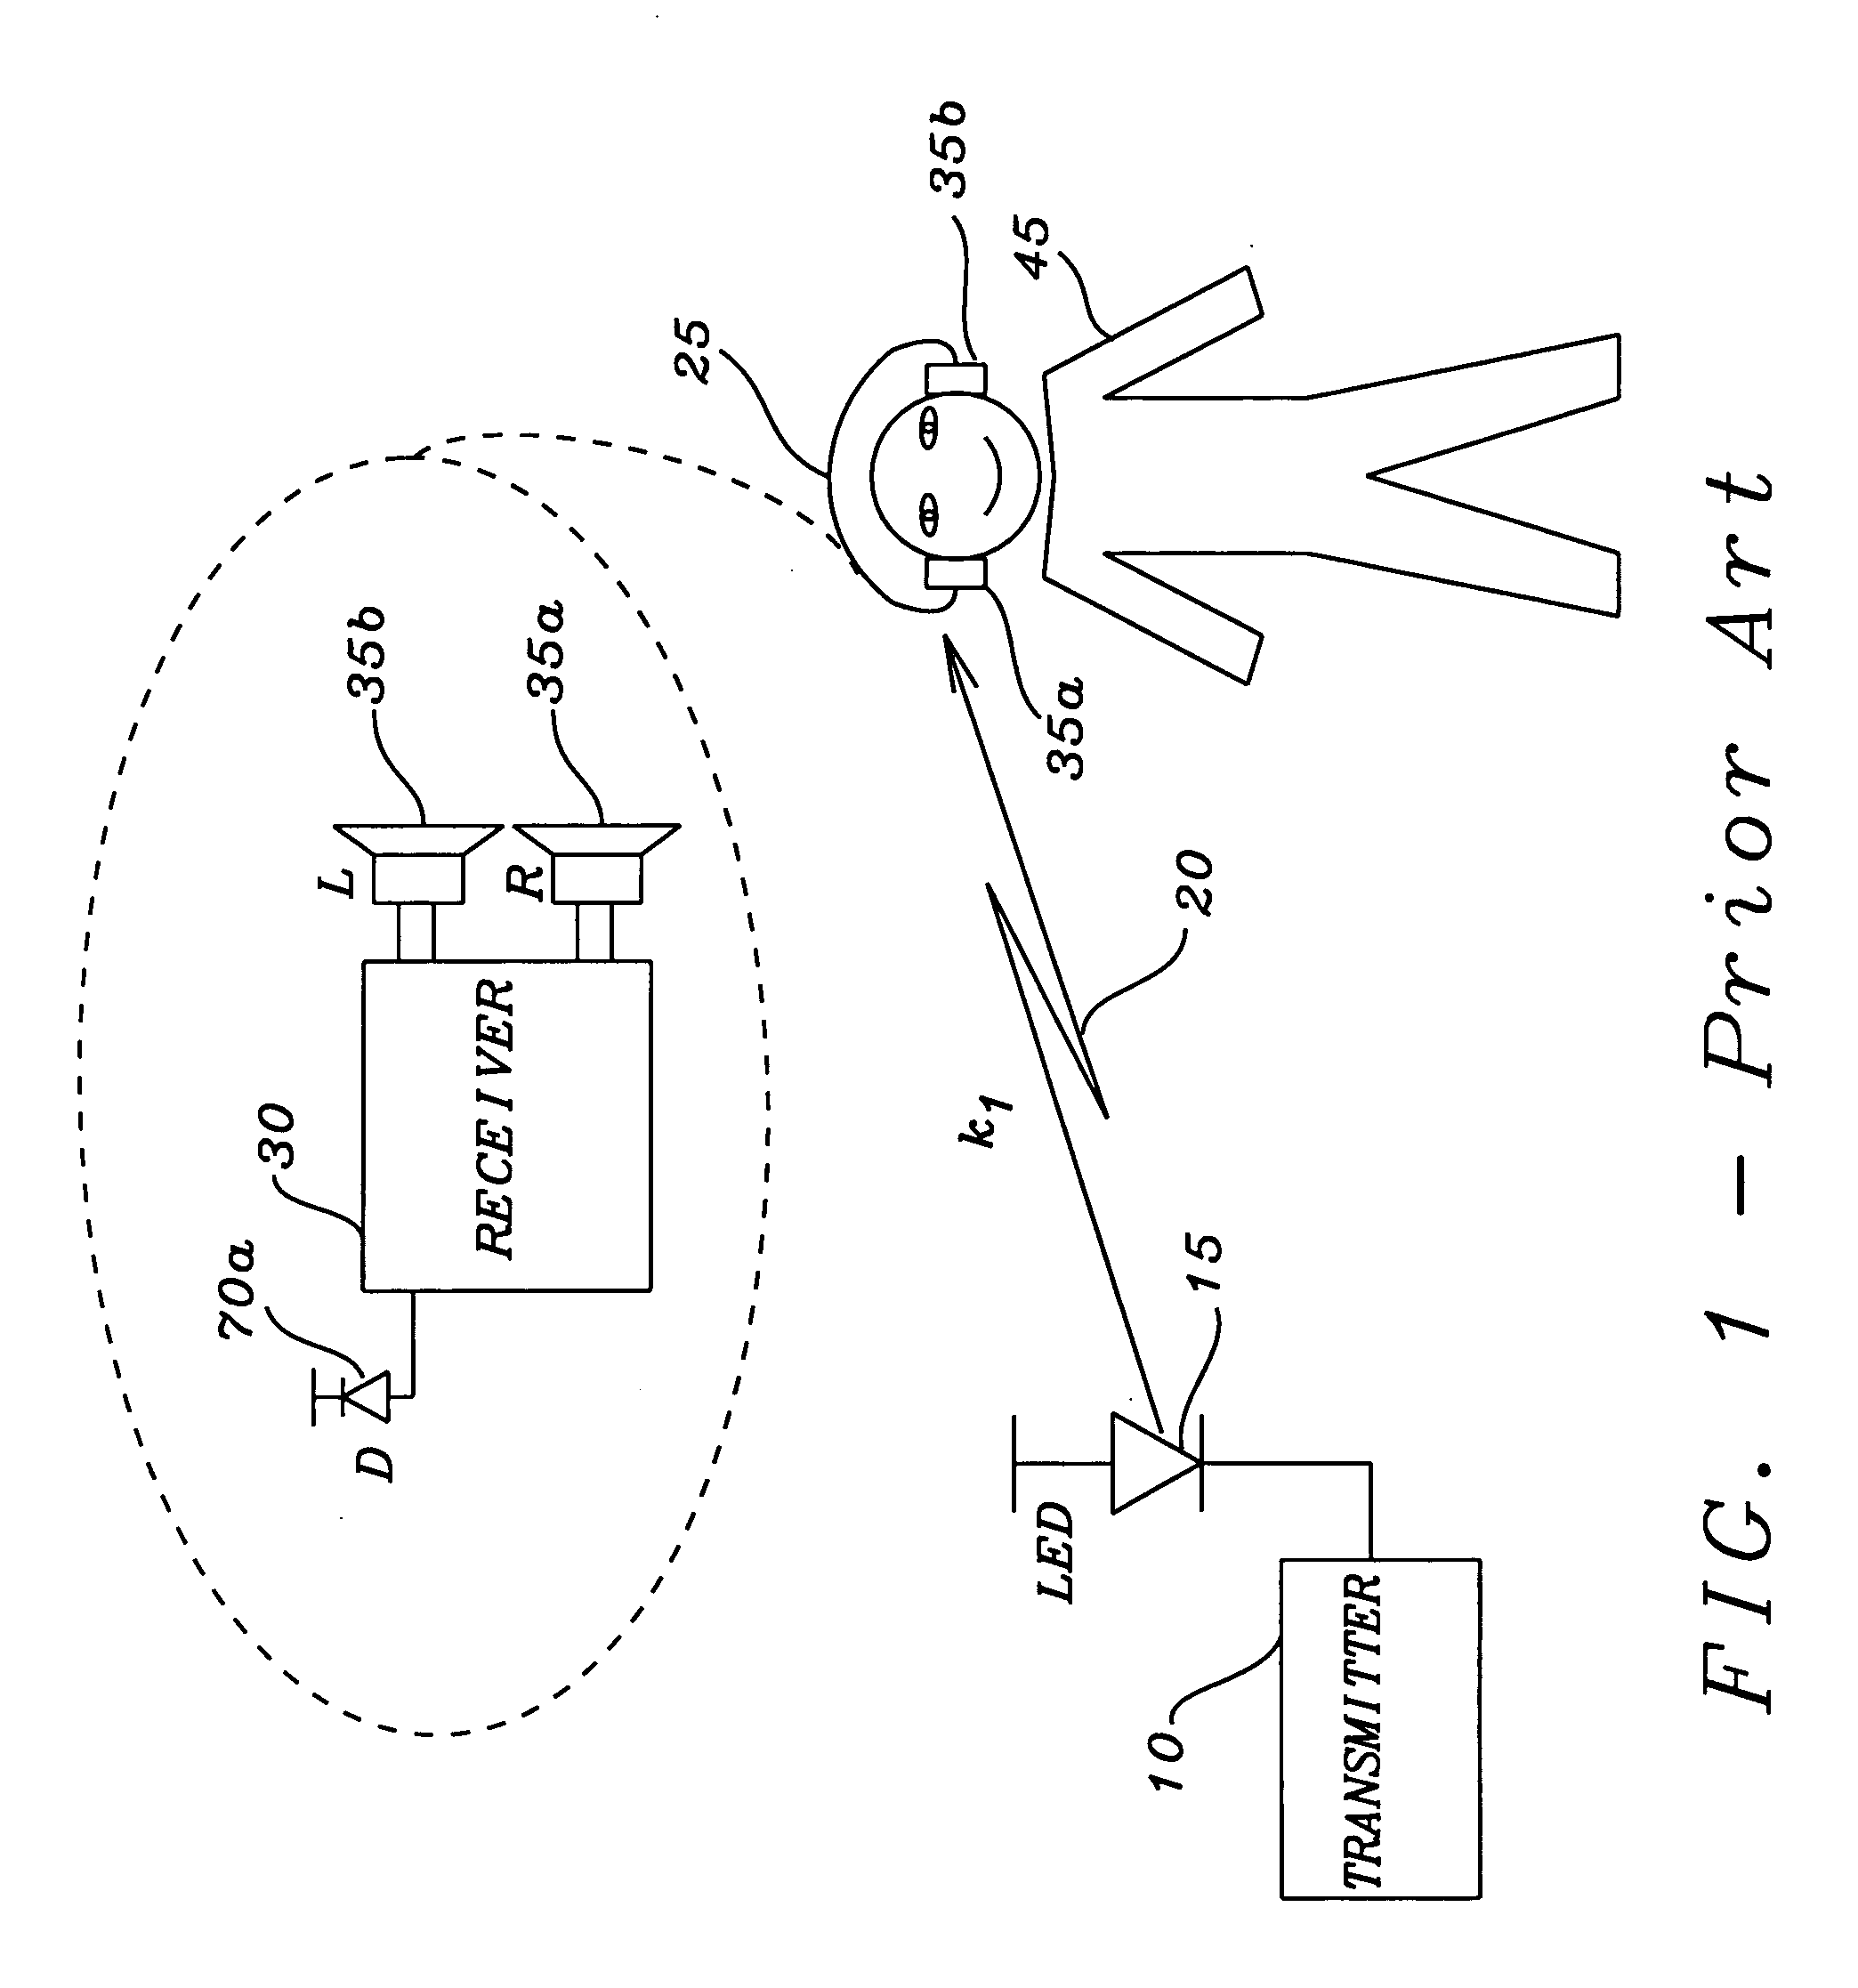 Method and apparatus for ensuring high quality audio playback in a wireless or wired digital audio communication system